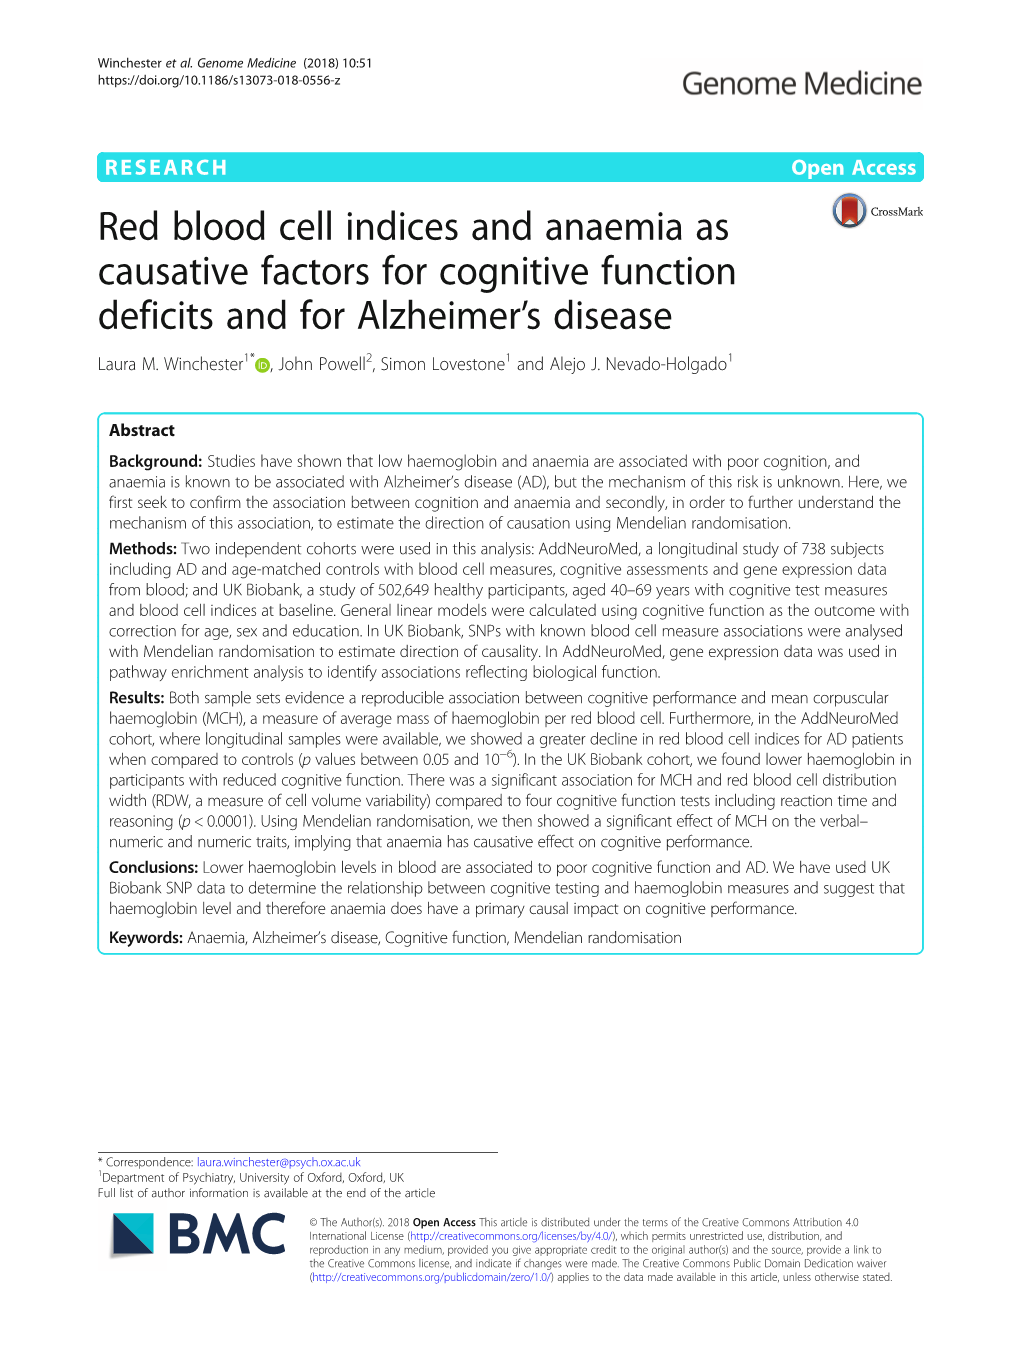 Red Blood Cell Indices and Anaemia As Causative Factors for Cognitive Function Deficits and for Alzheimer’S Disease Laura M